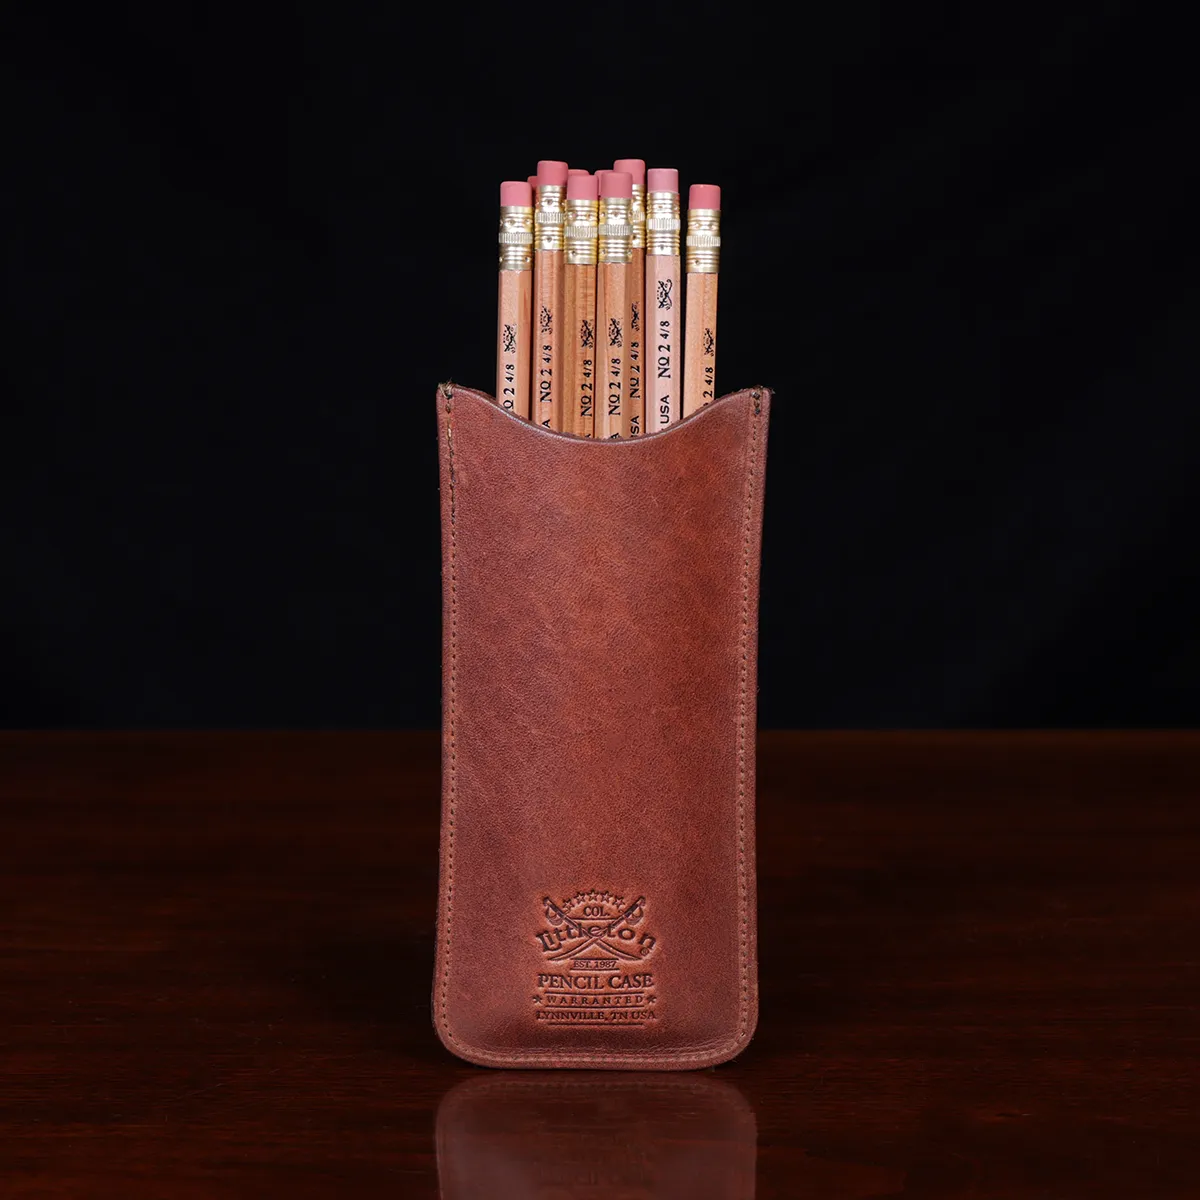 leather pencil case on wooden table with 12 pencils - back view